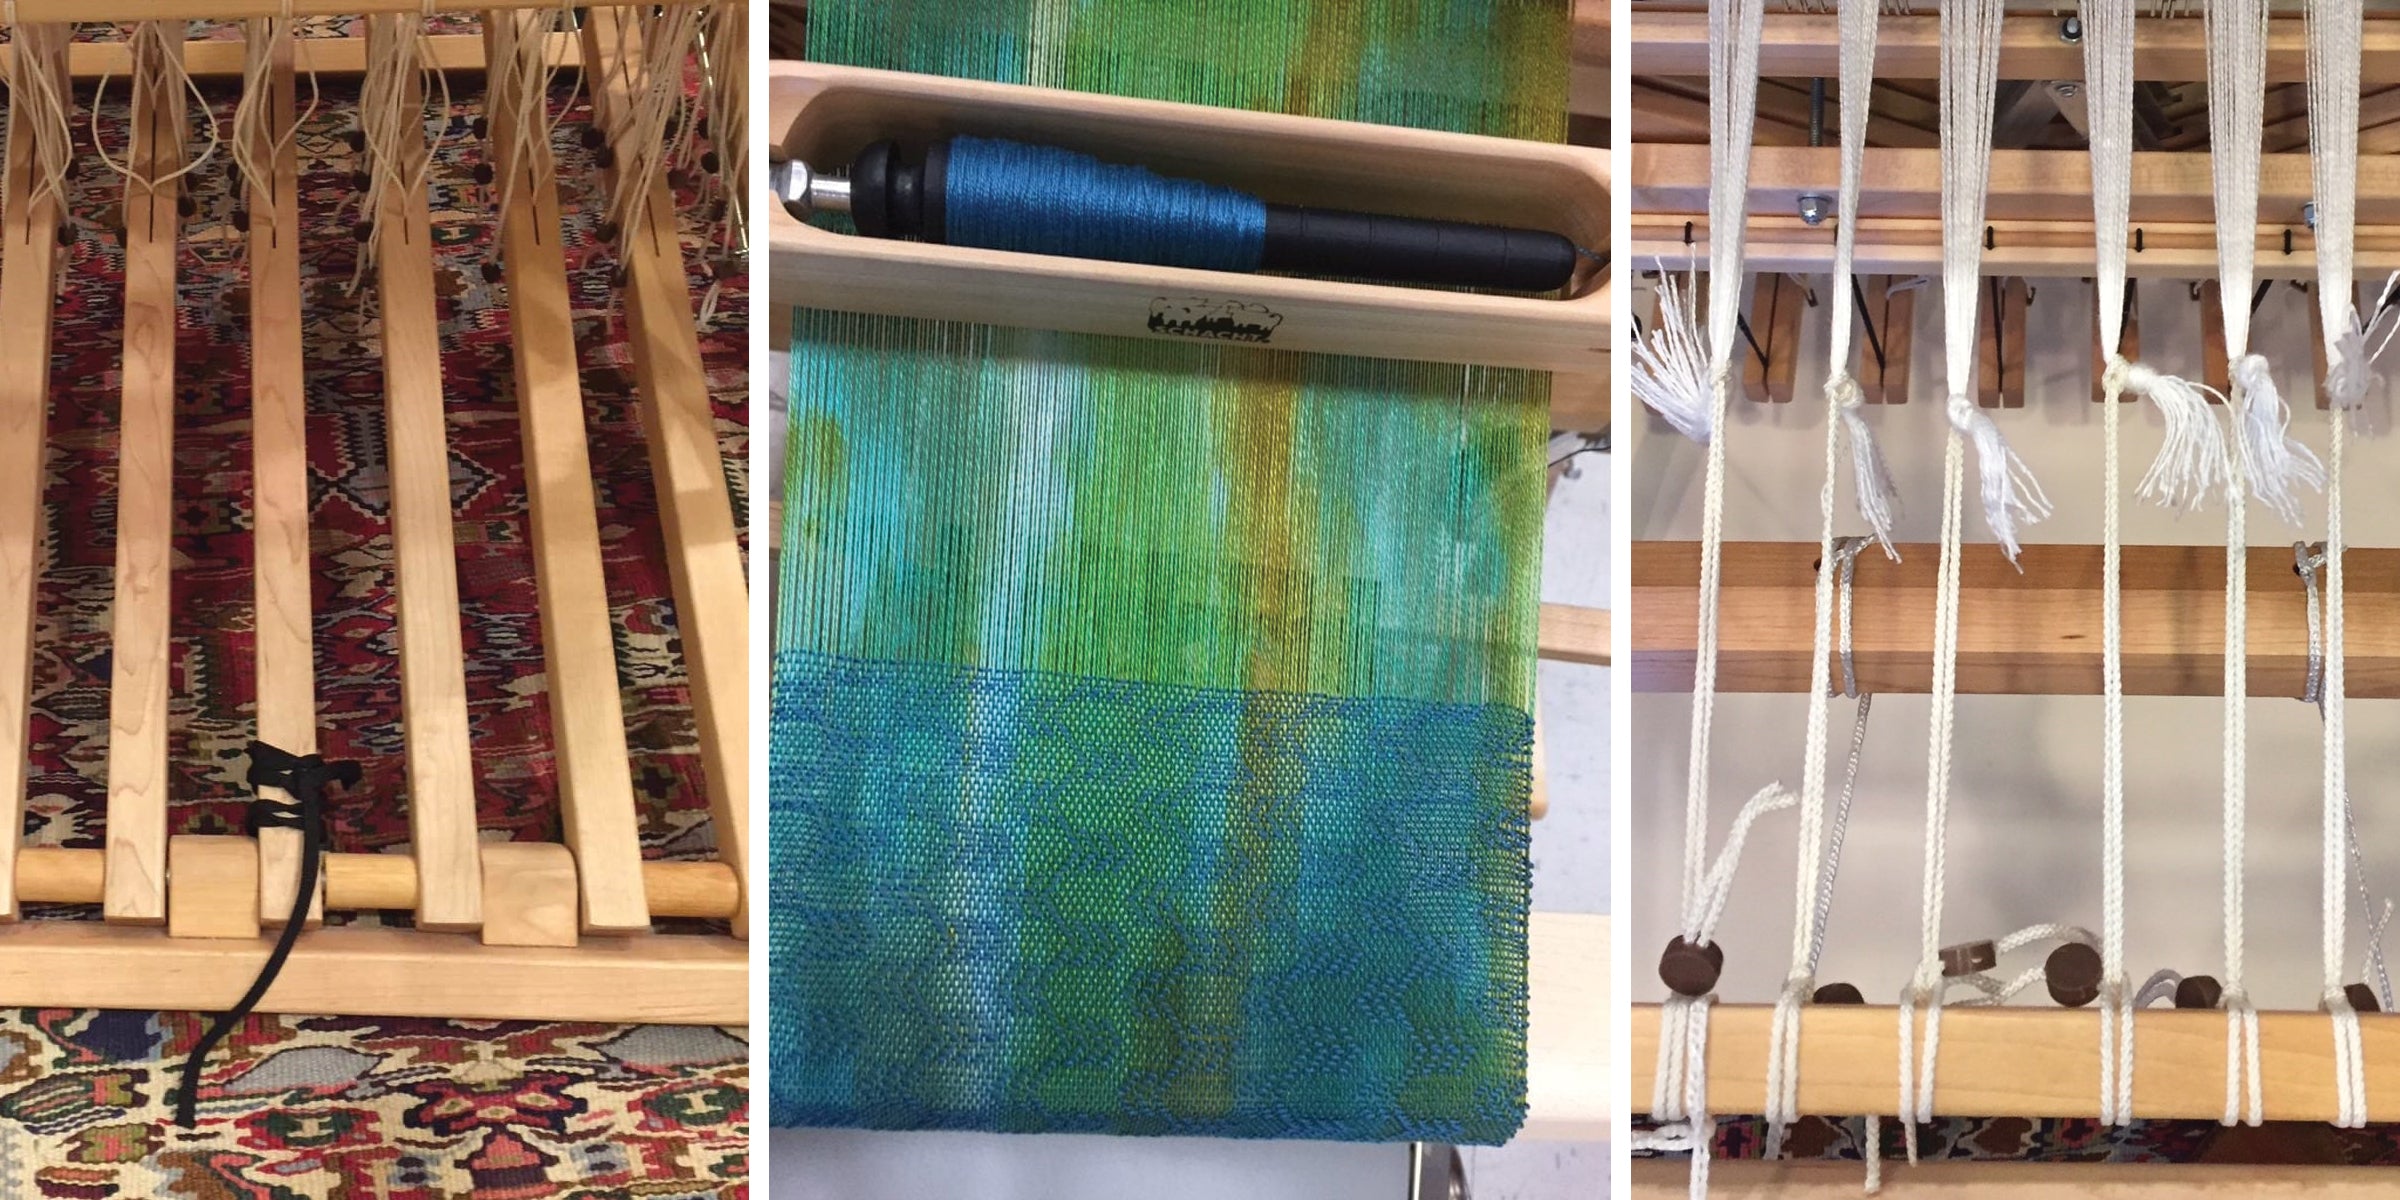 Weaving Tips: Draft Mix and Match and More!